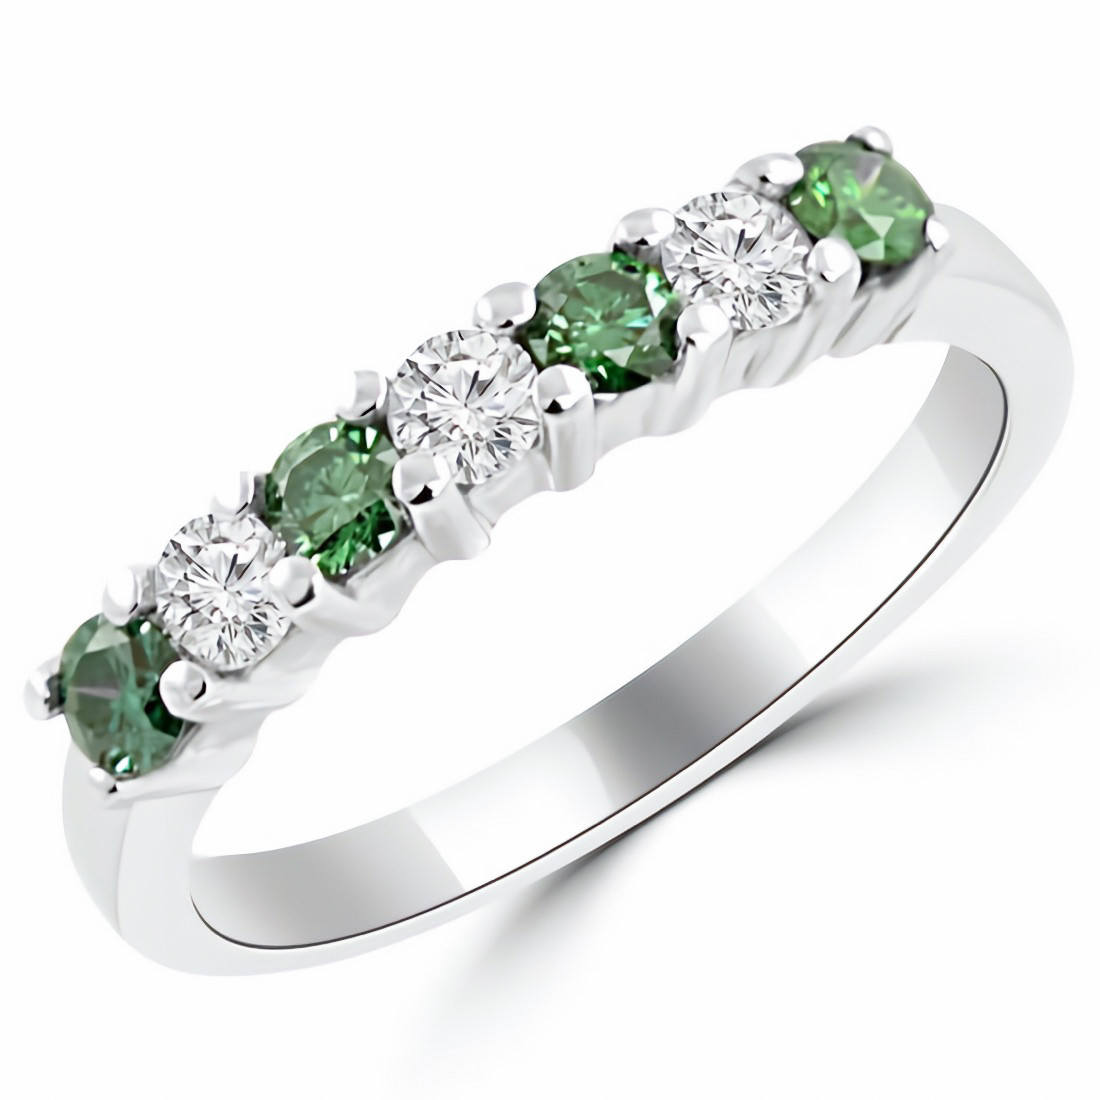 Buy Silver & Green Rings for Women by Ornate Jewels Online | Ajio.com